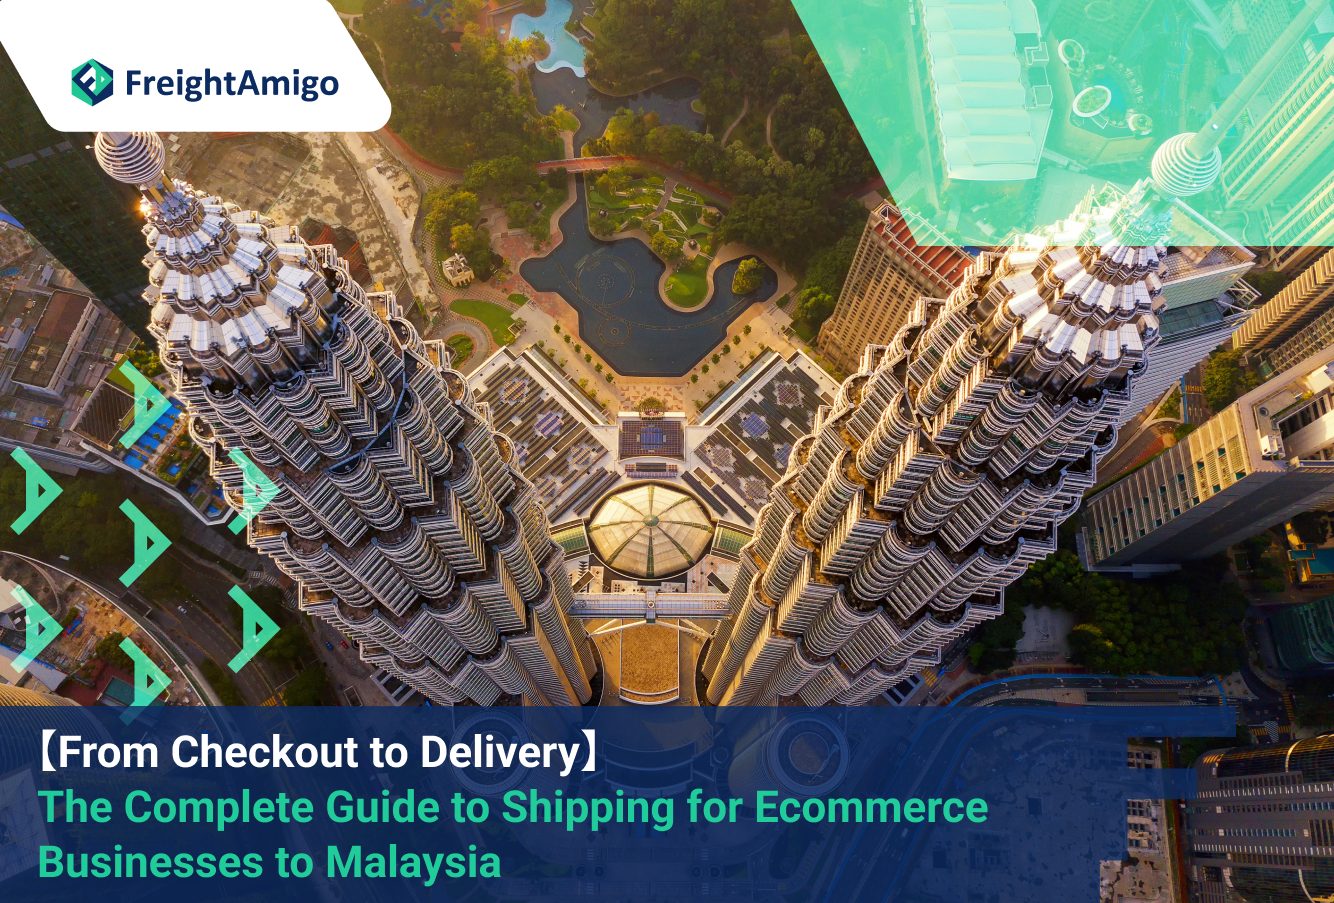 A Complete Guide to Shipping for eCommerce Businesses to Malaysia